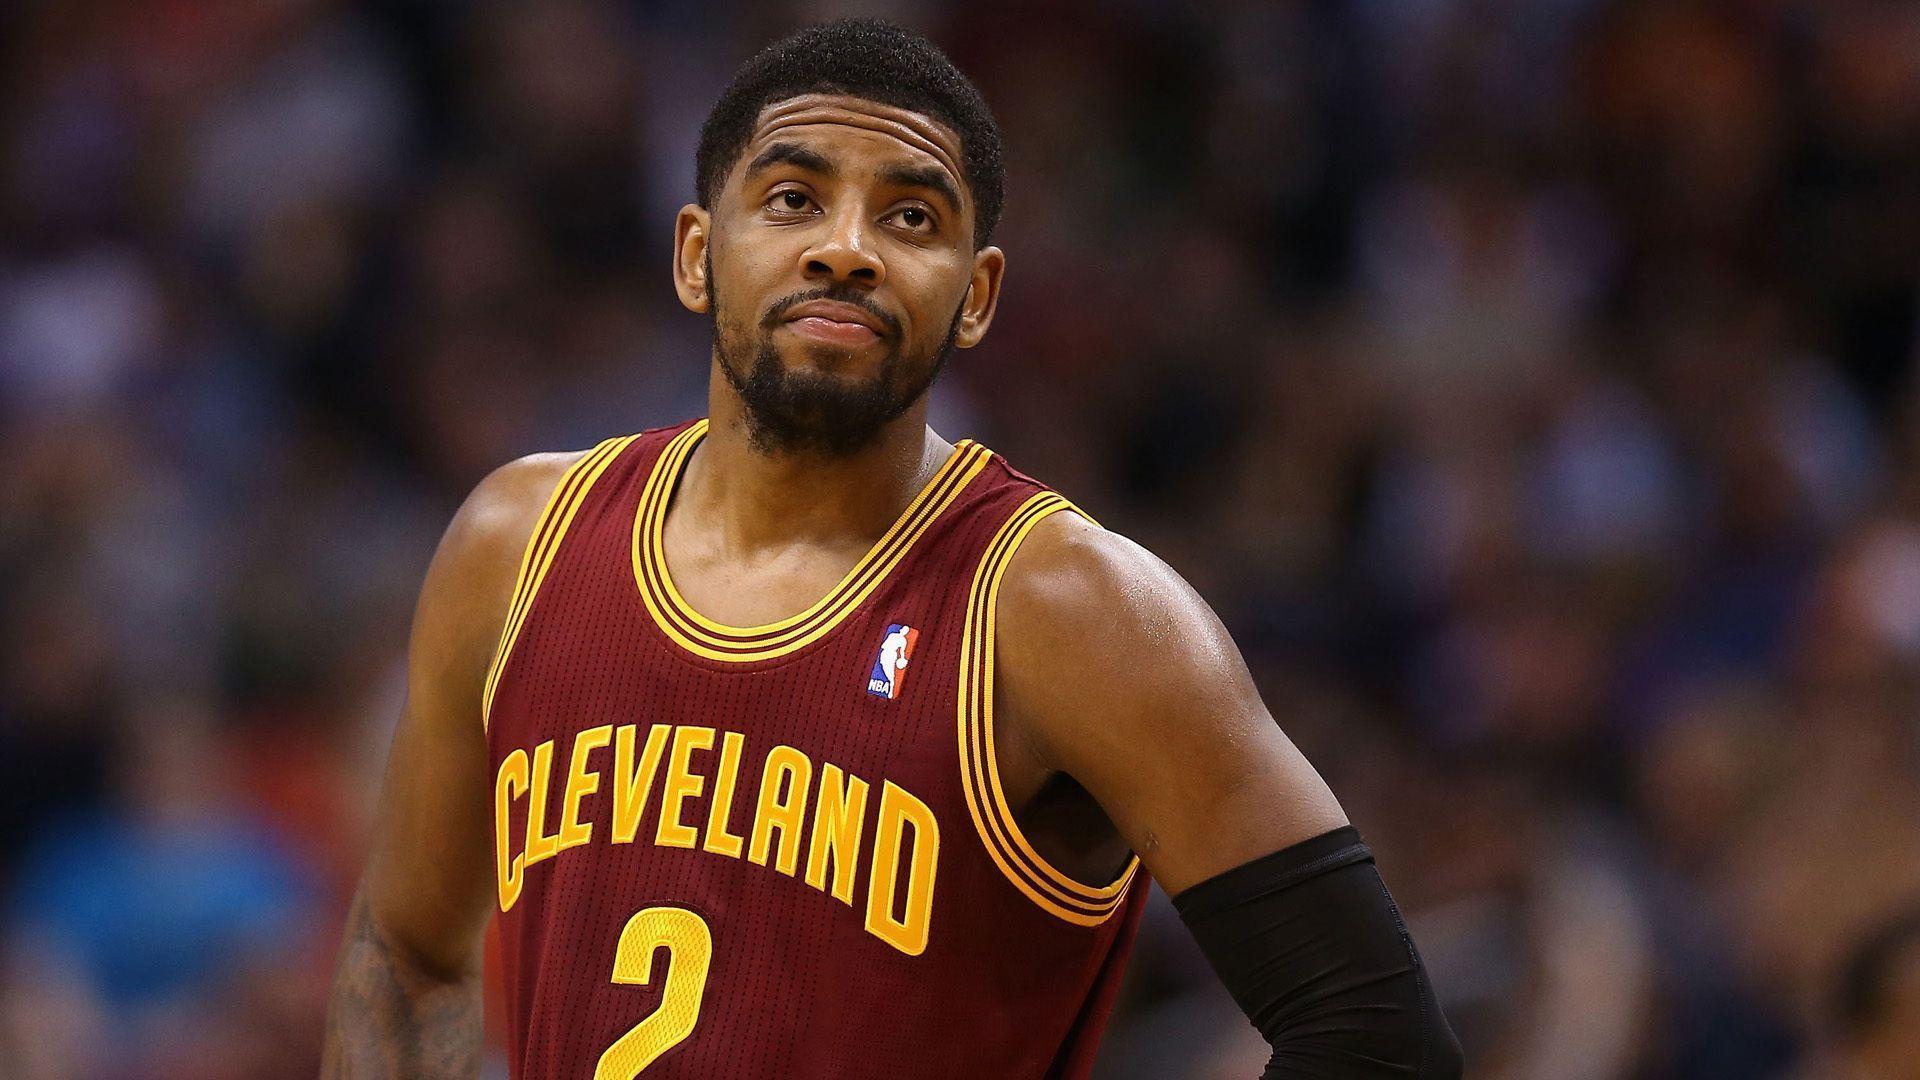 Kyrie Irving Wallpaper Image Photo Picture Background